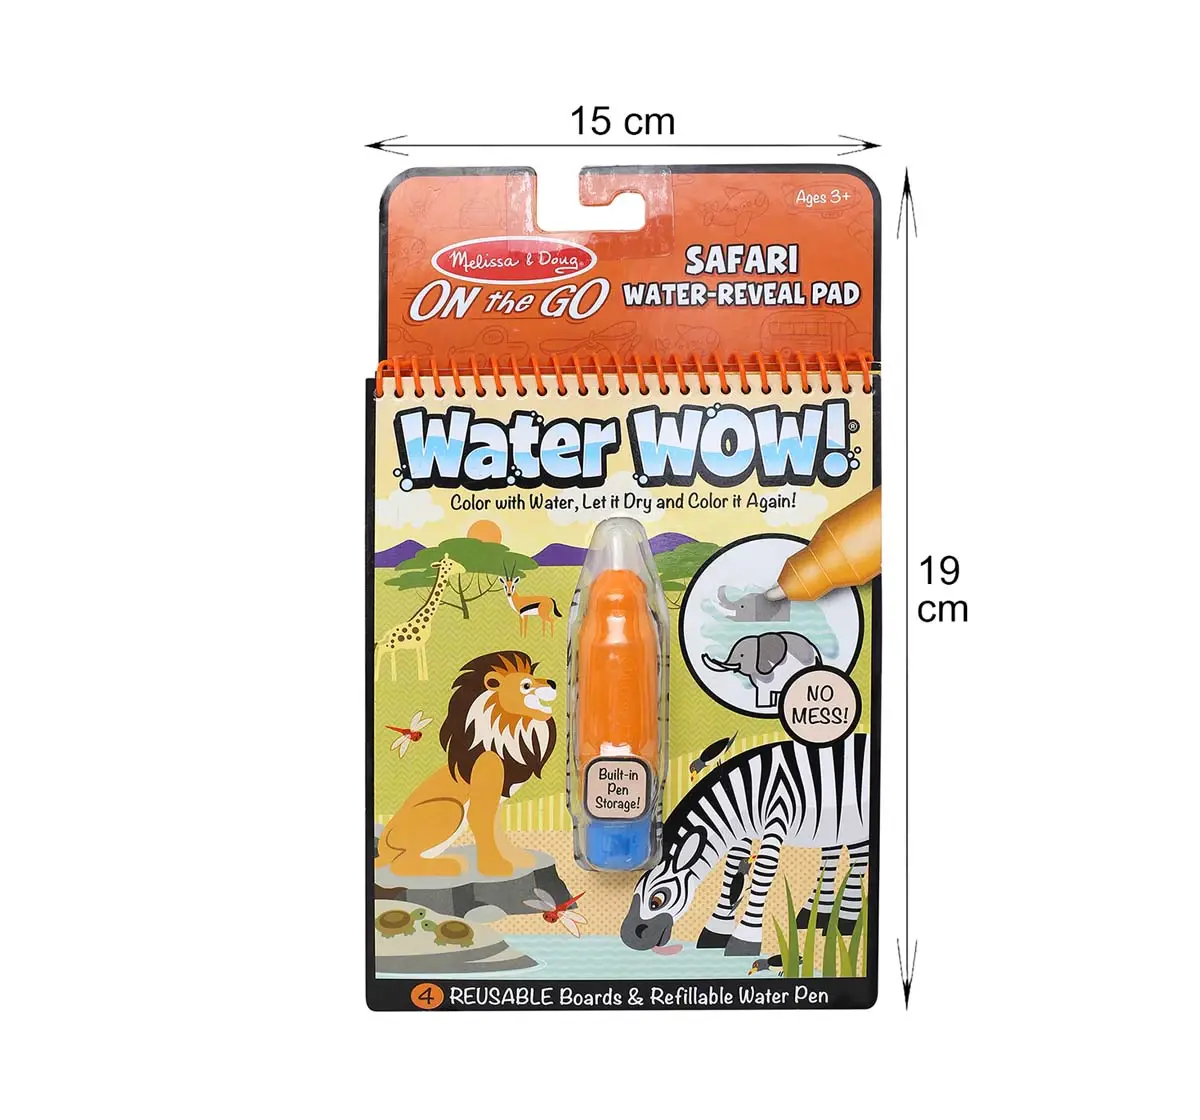 Melissa & Doug On The Go Water Wow! Safari (Reusable Water-Reveal Activity Pad, Chunky-Size Water Pen) School Stationery for Kids age 3Y+ 